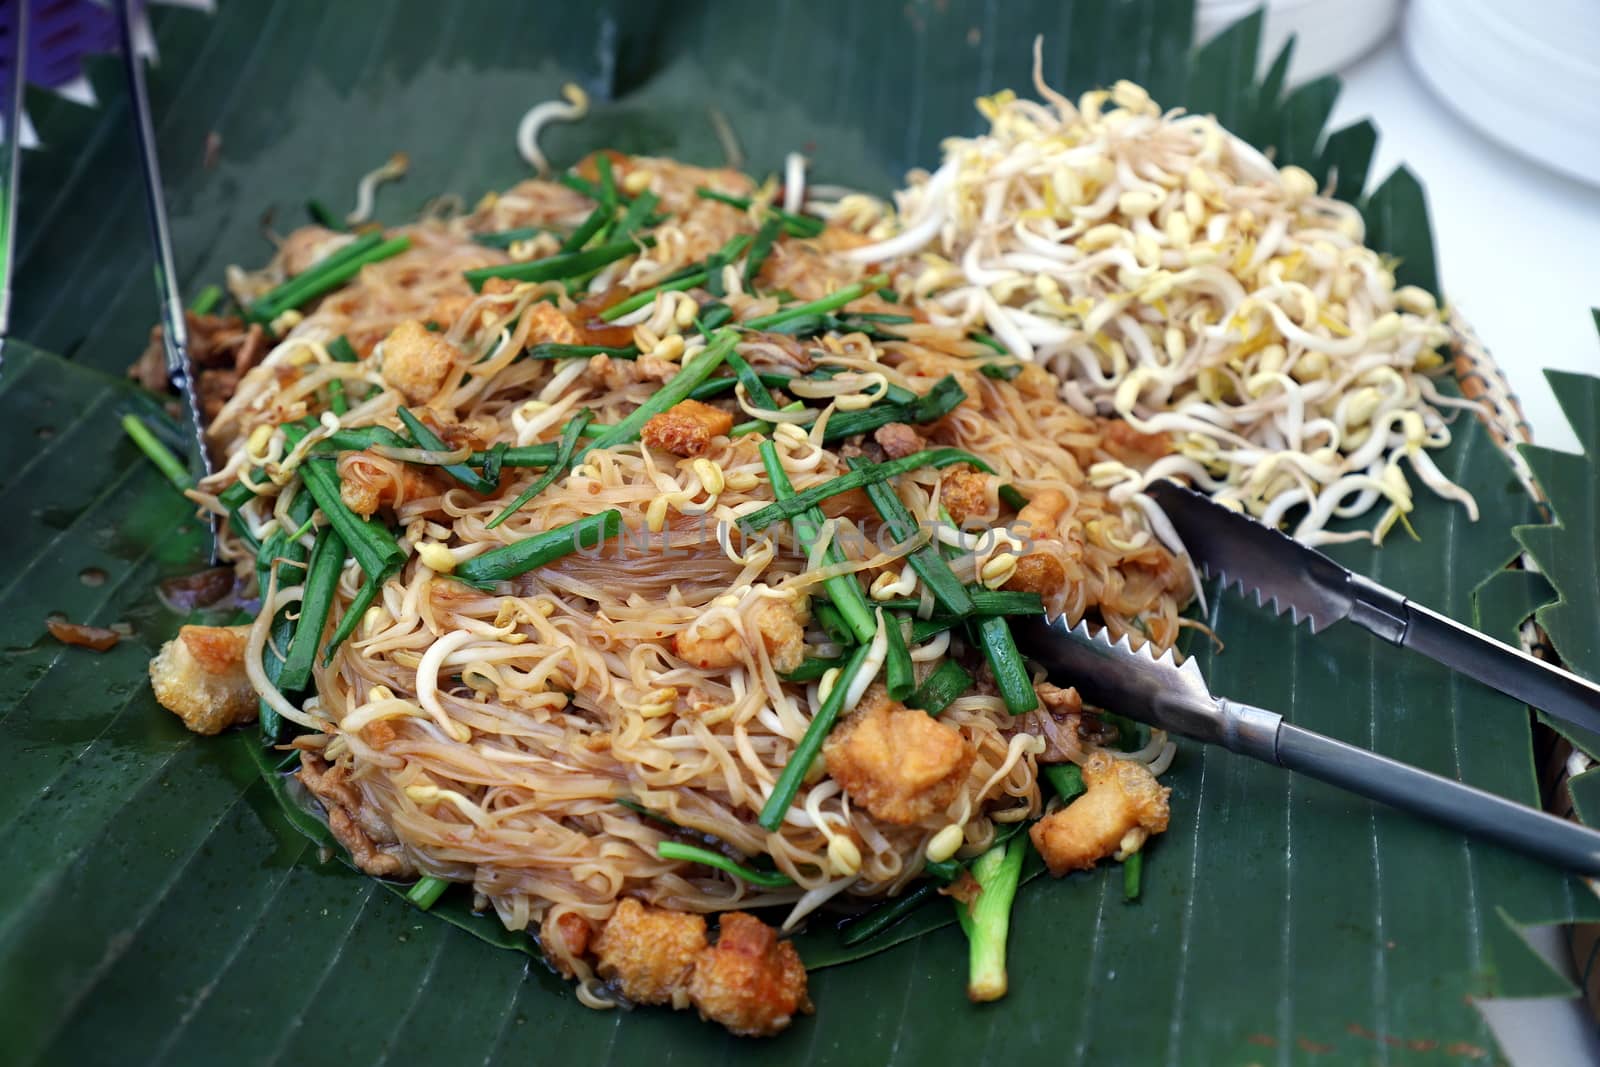 Korat Pad Mee is a local dish from Nakhon Ratchasima, Thailand, looks similar to Pad Thai in the central region on banana leaves, with a stainless steel tongs placed next to it. Selective focus. by joker3753